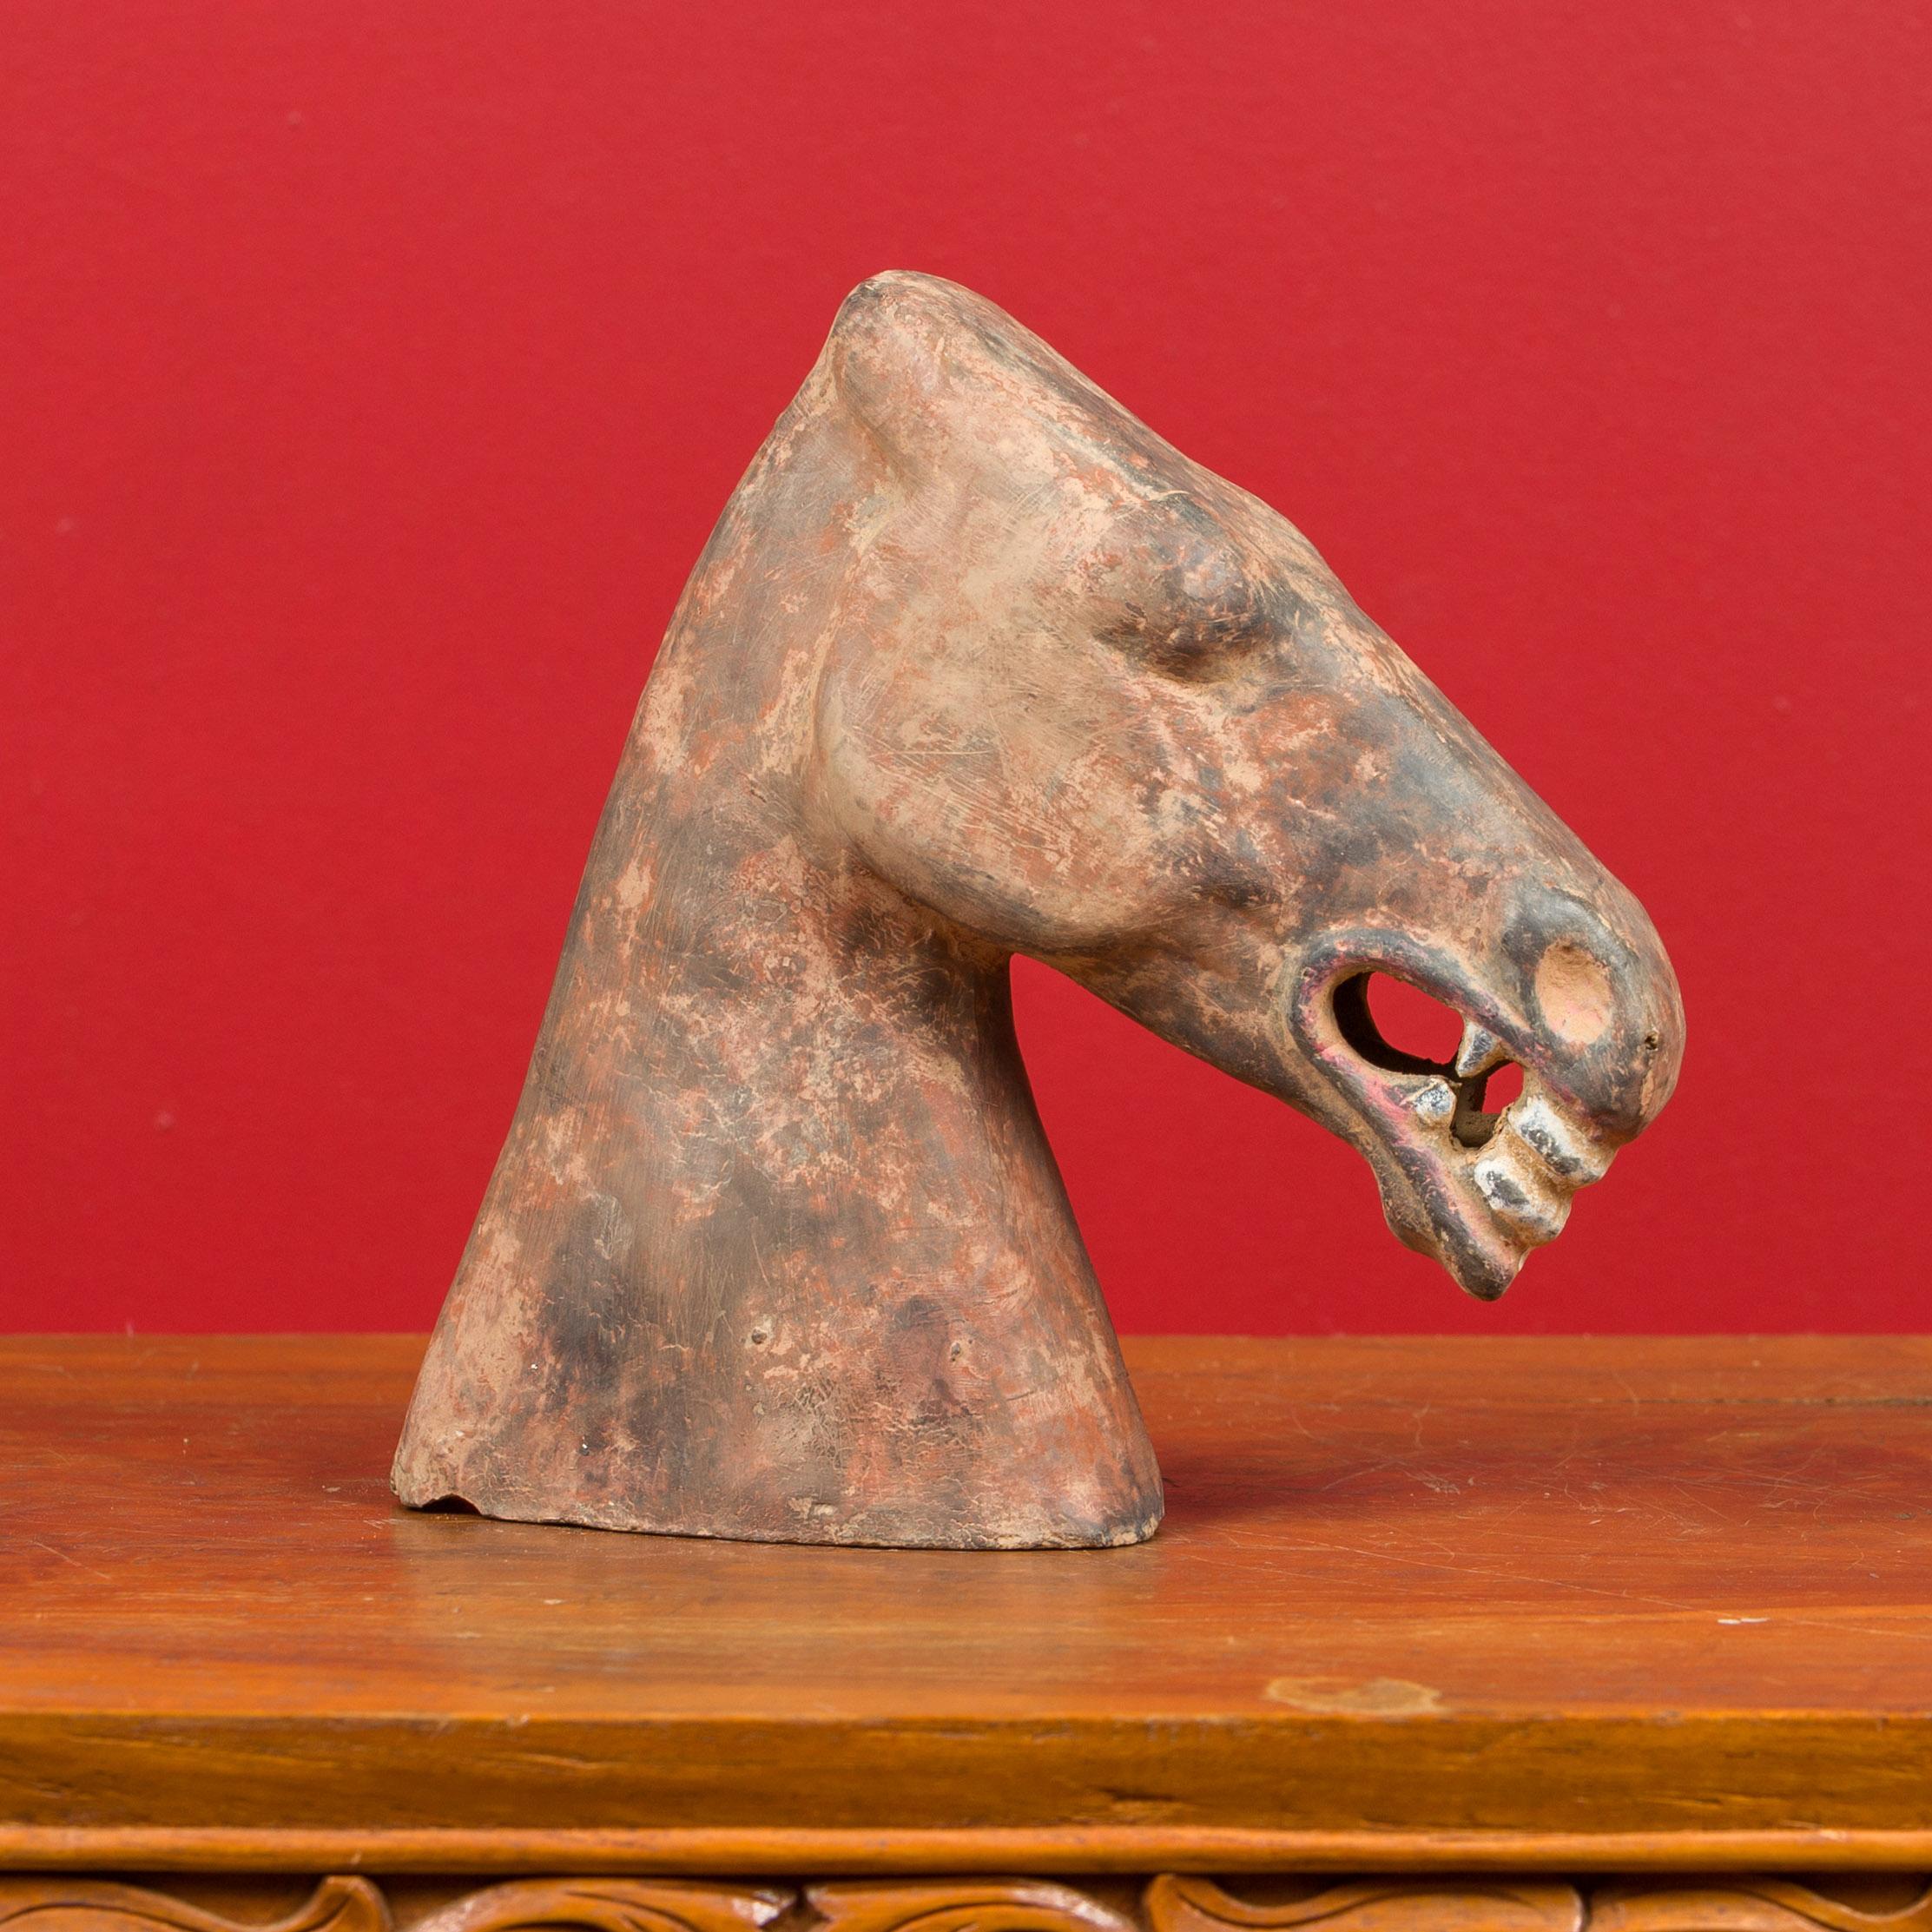 A Chinese Han Dynasty terracotta horse head sculpture circa 202 BC-200 AD, with original pigment. Created in China during the prestigious Han Dynasty, this terracotta sculpture features a horse head boasting a nicely weathered patina and a striking